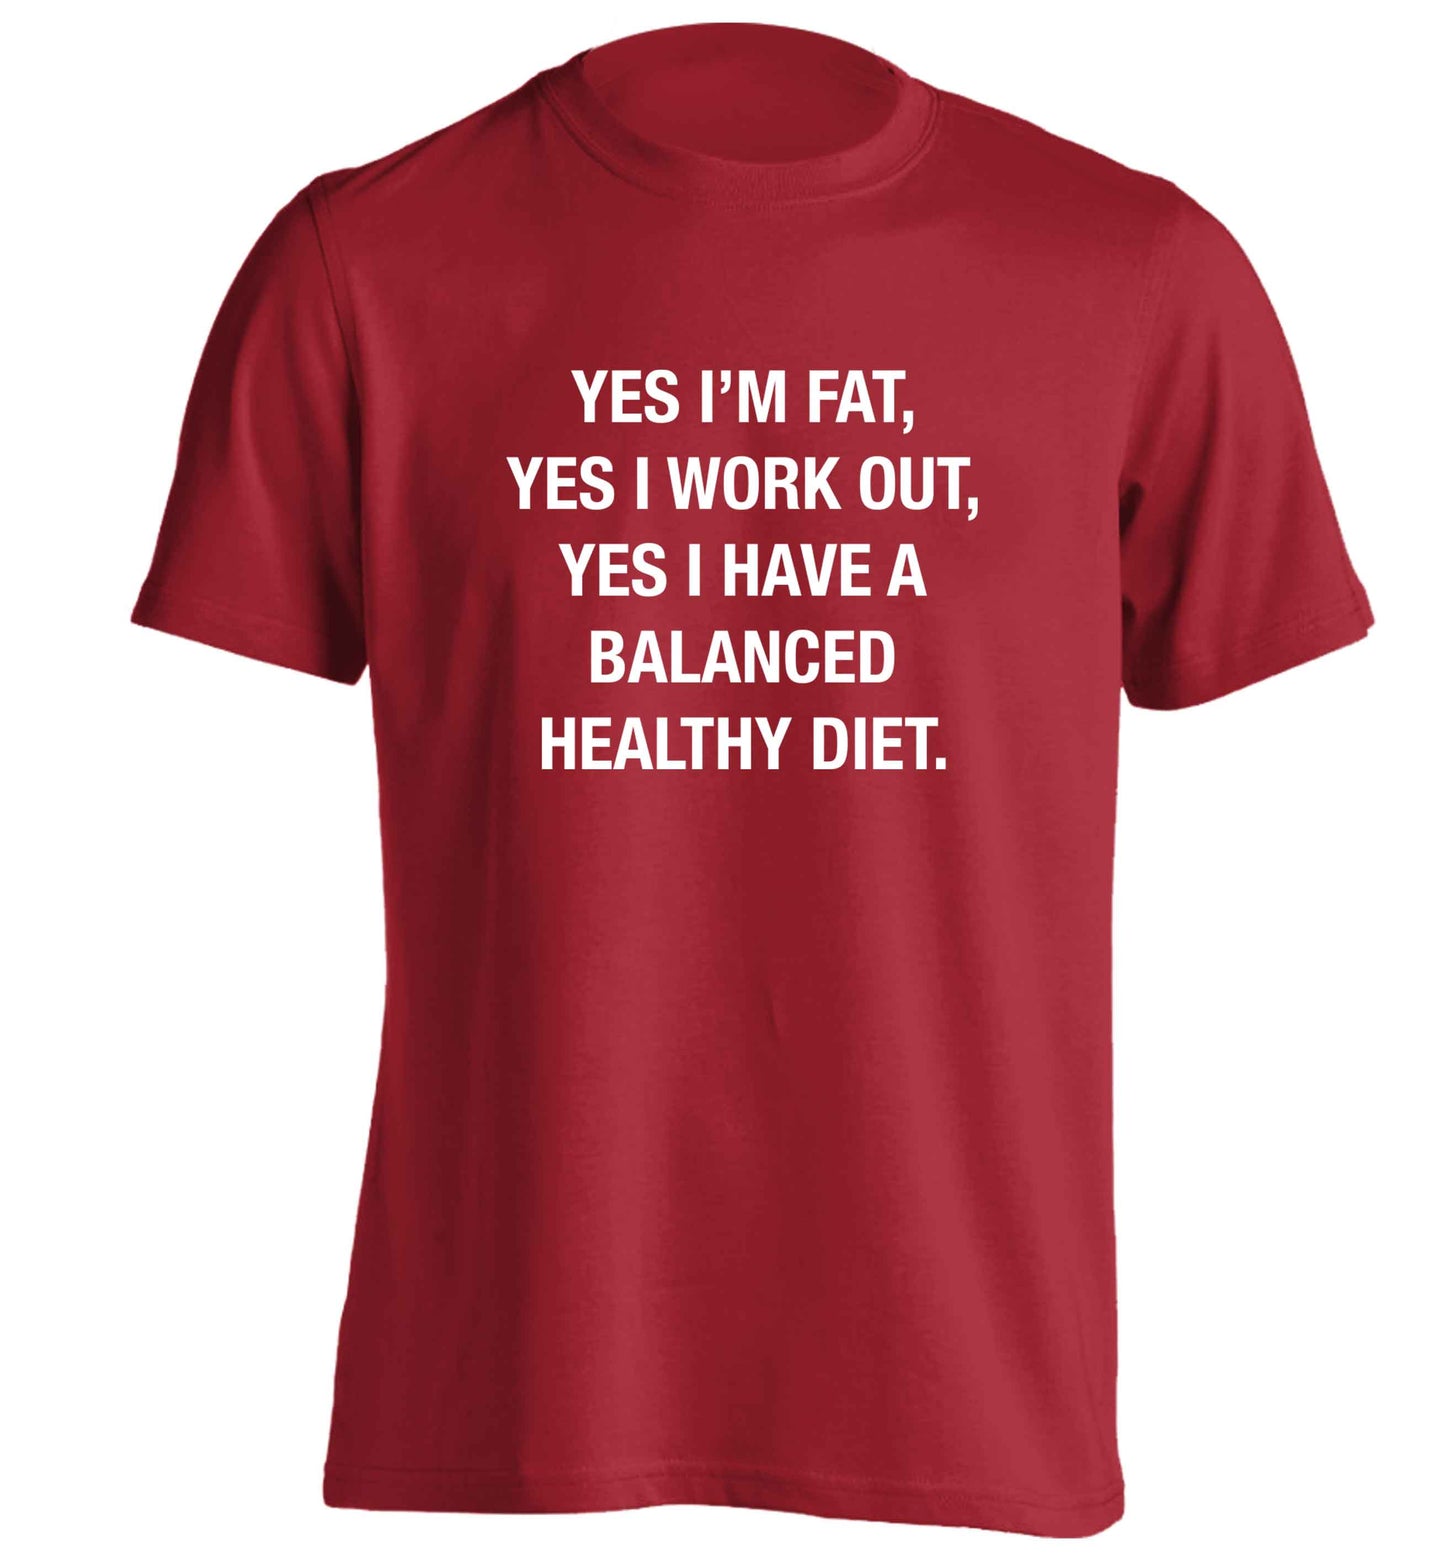 Yes I'm fat, yes I work out, yes I have a balanced healthy diet adults unisex red Tshirt 2XL